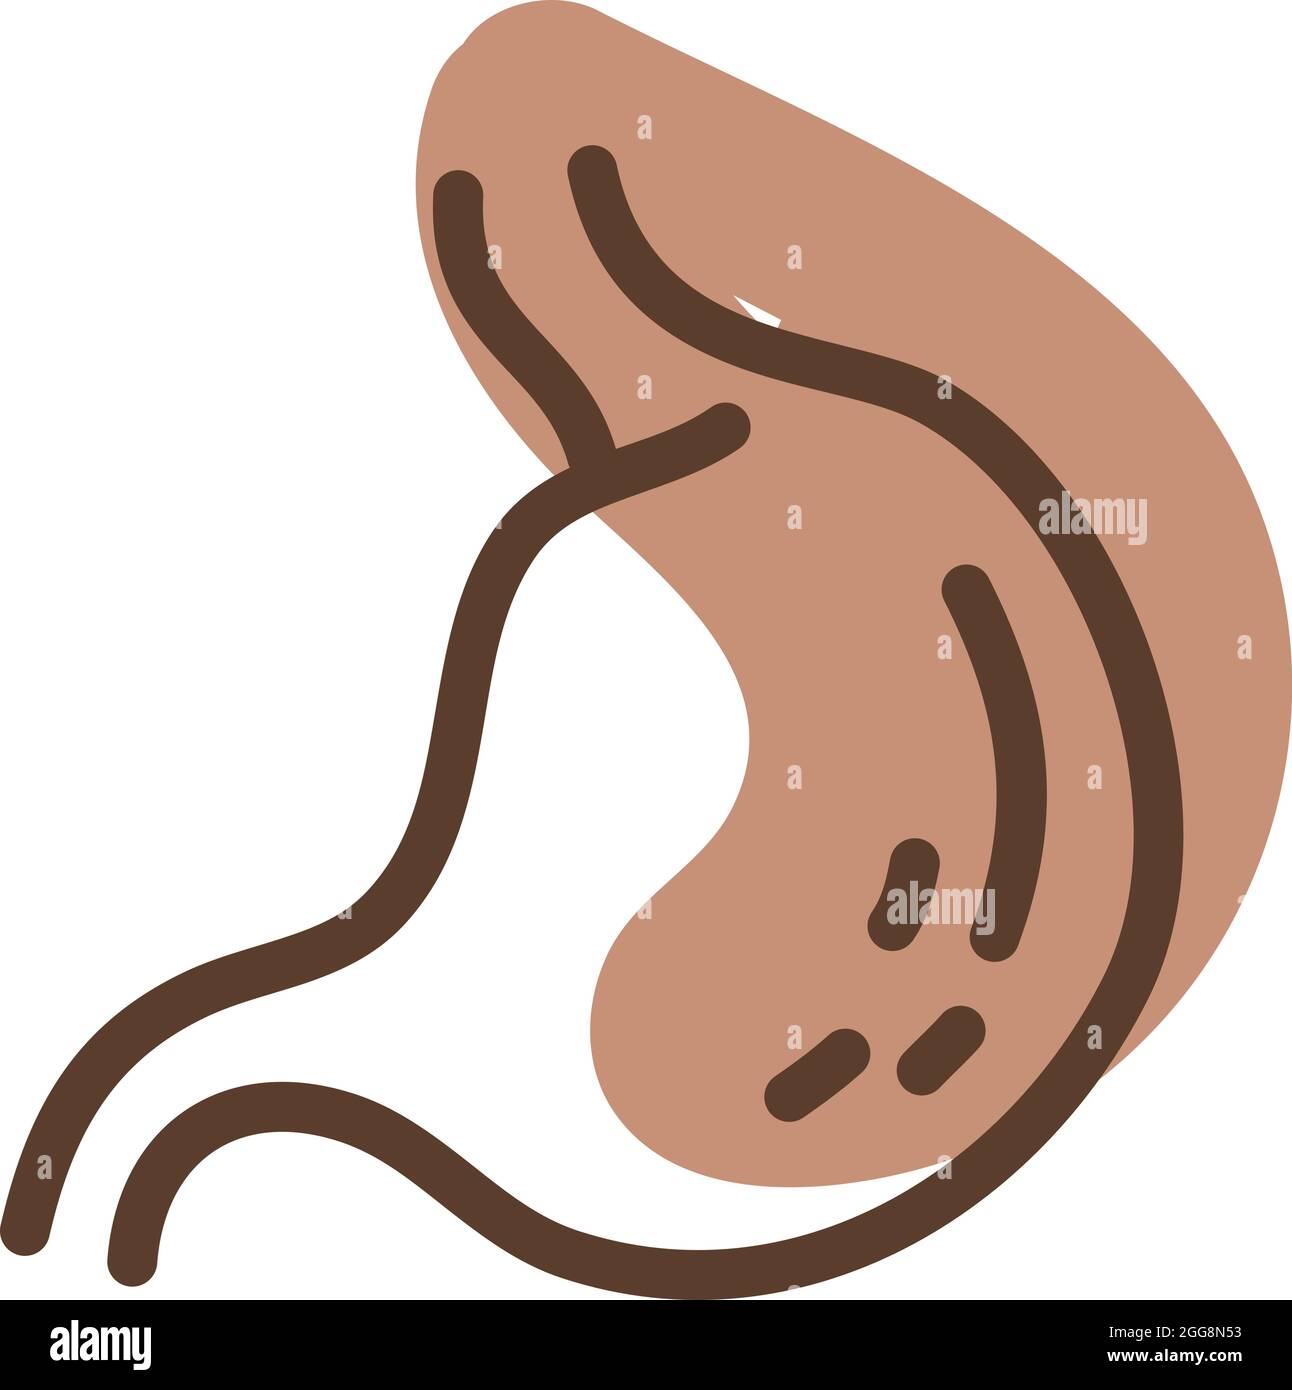 Human stomach, illustration, vector, on a white background. Stock Vector